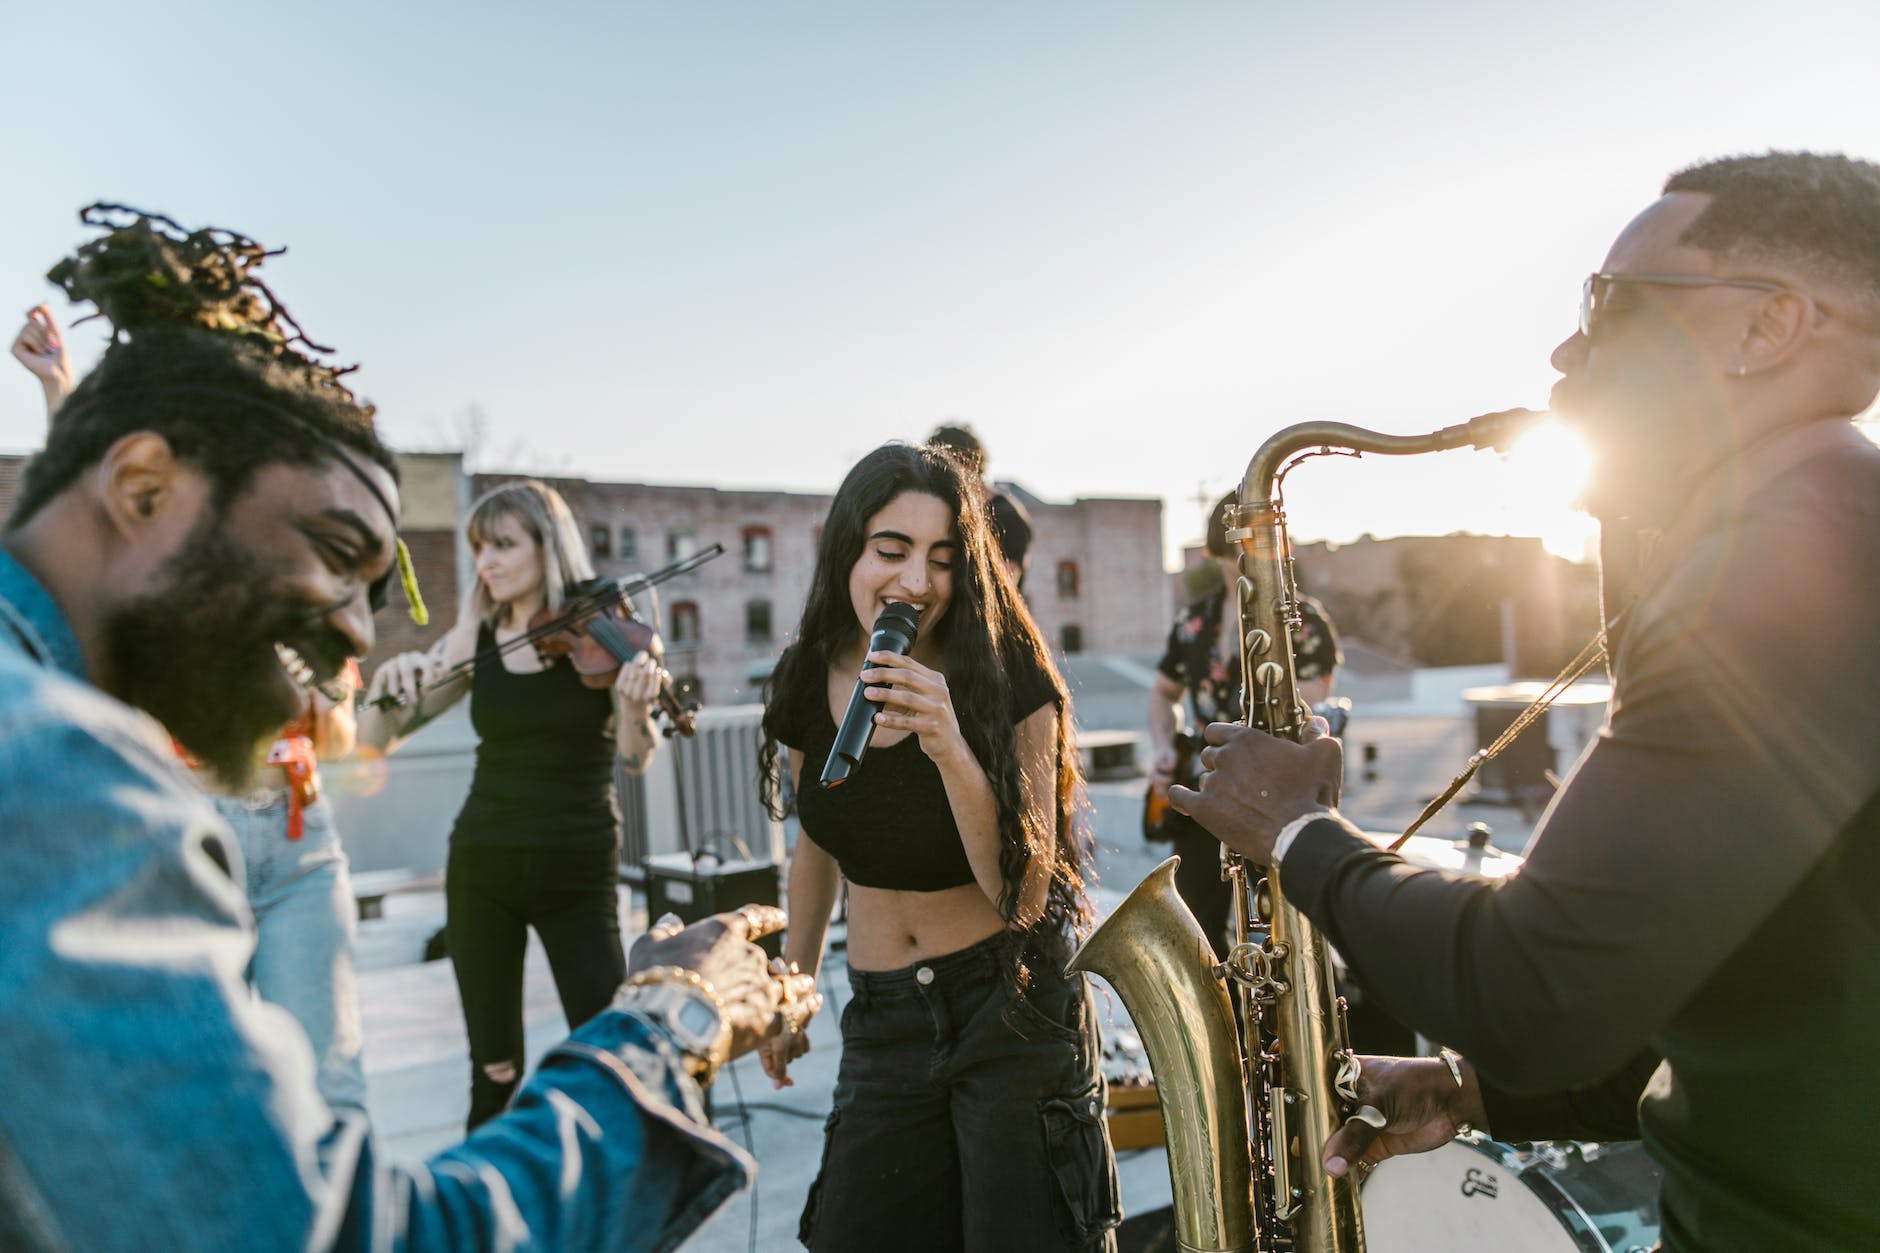 woman in black top singing beside man playing saxophone on the rooftop during golden hour